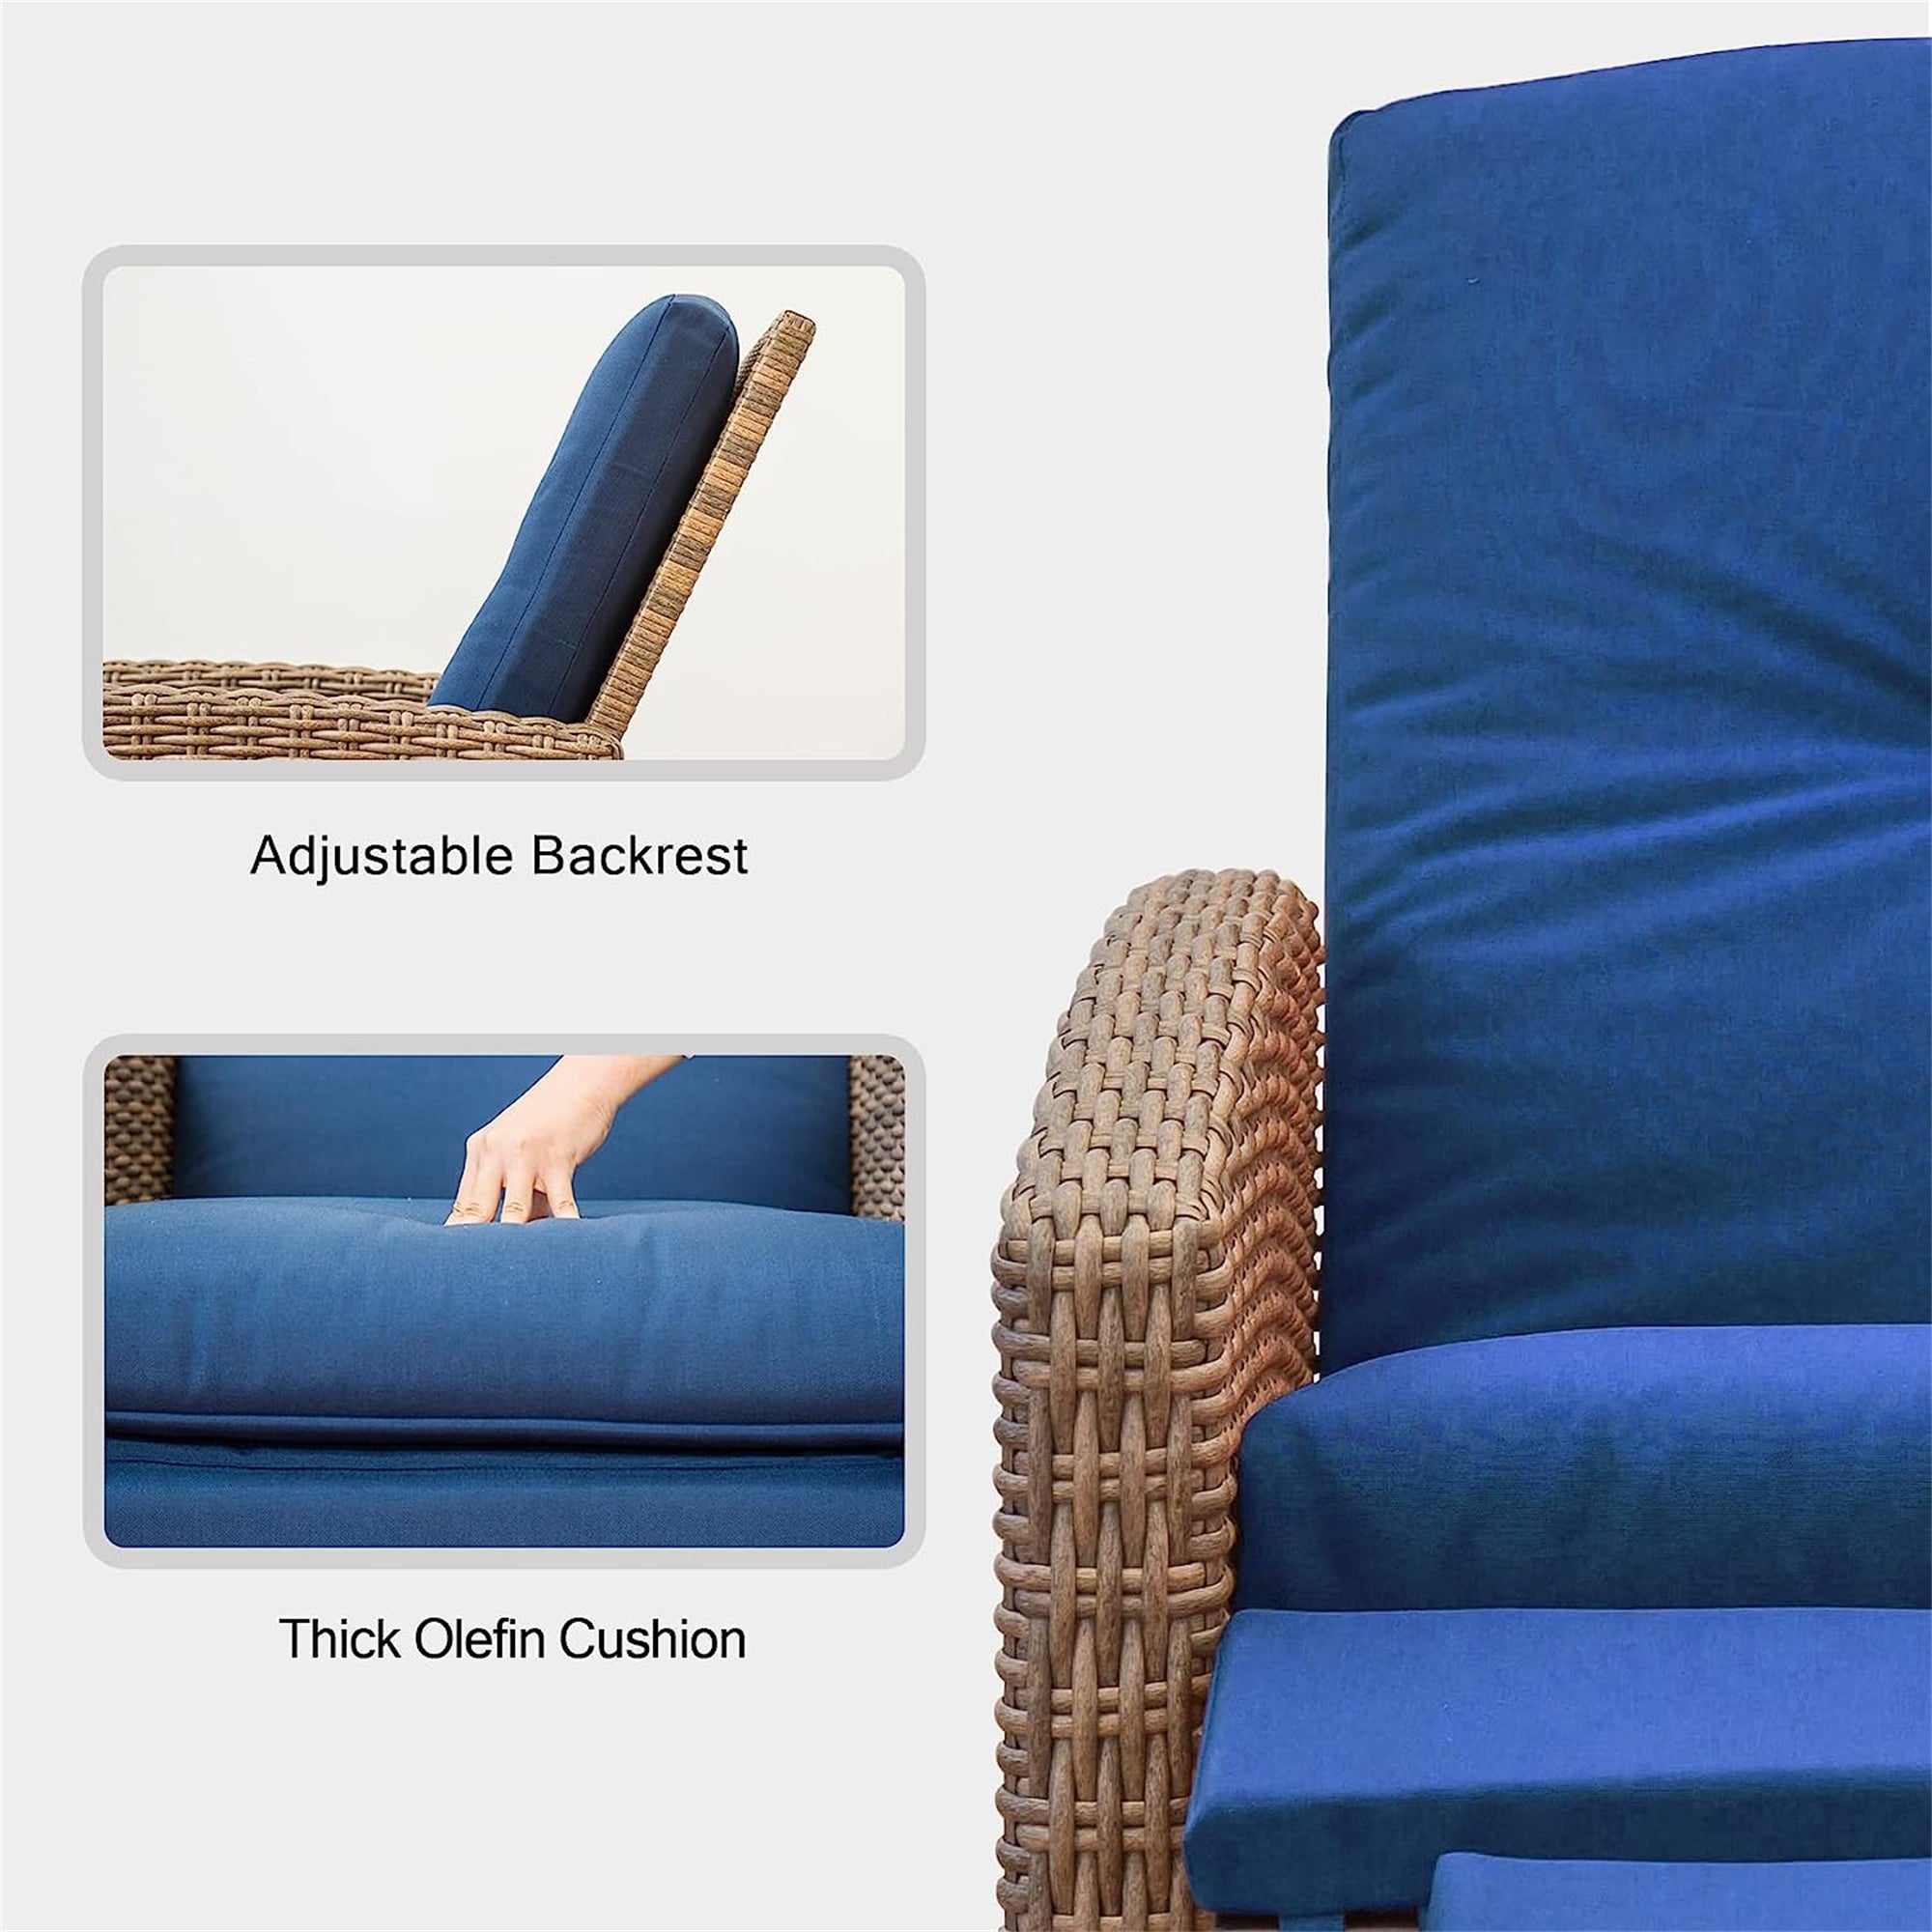 Indoor & Outdoor Recliner, All-Weather Wicker Reclining Patio Chair, Blue Cushion (Blue,1 Chair)